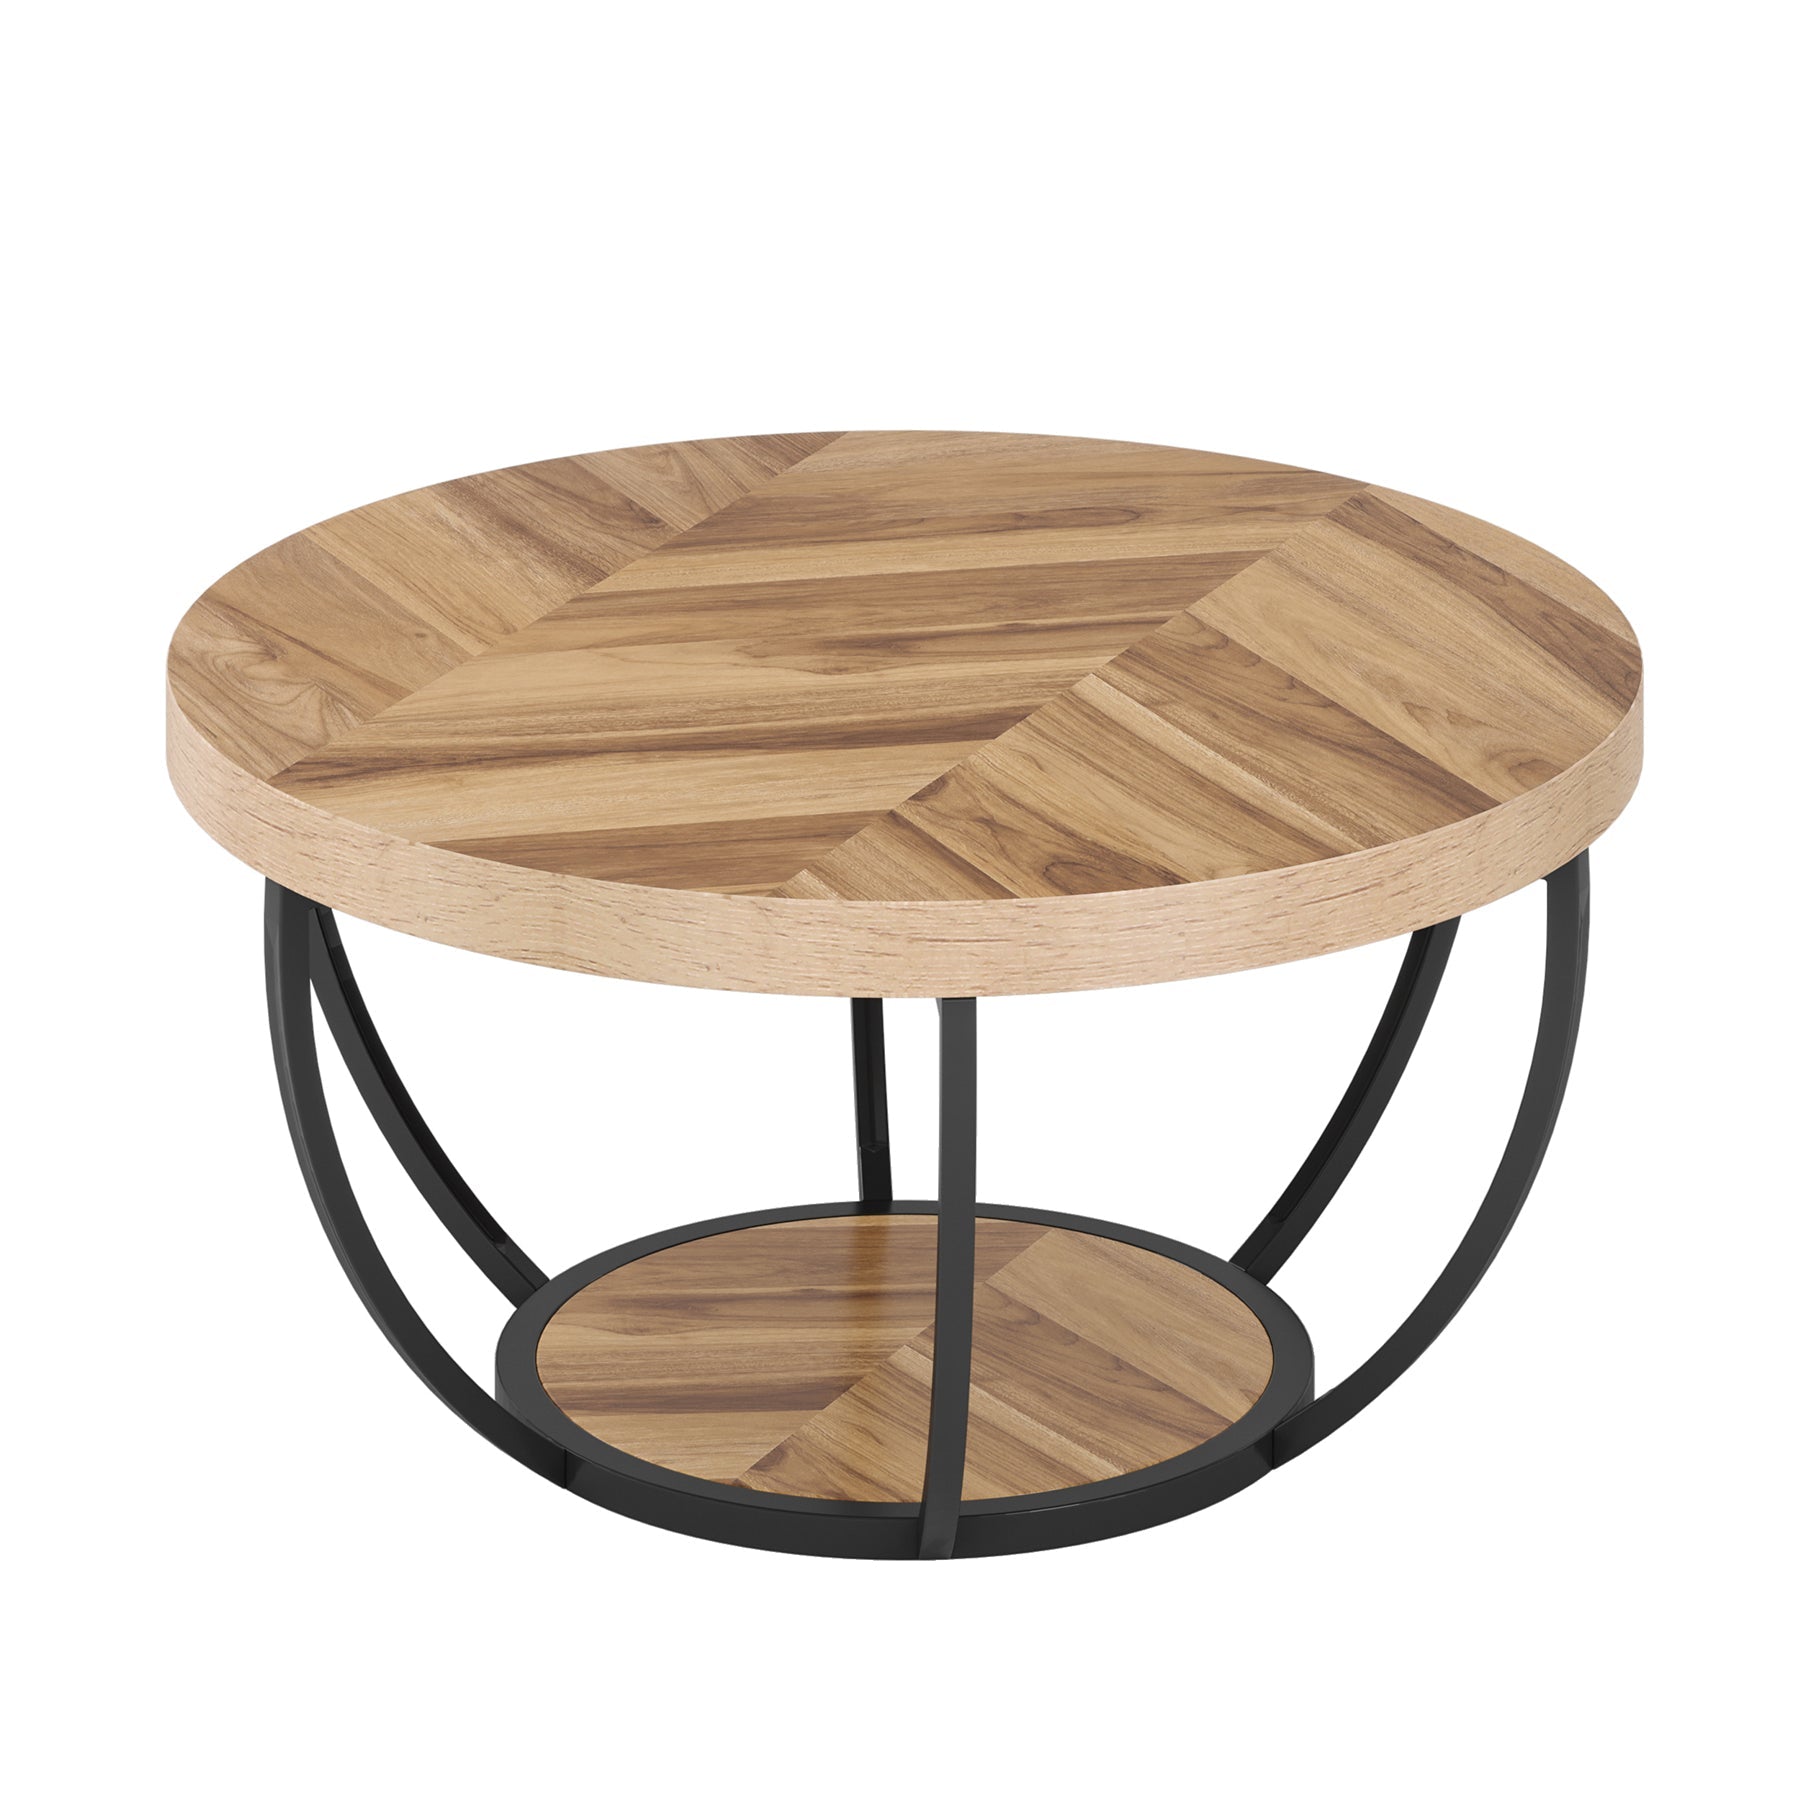 Wooden Coffee Table, 2-Tier Round Central Cocktail Table with Shelves